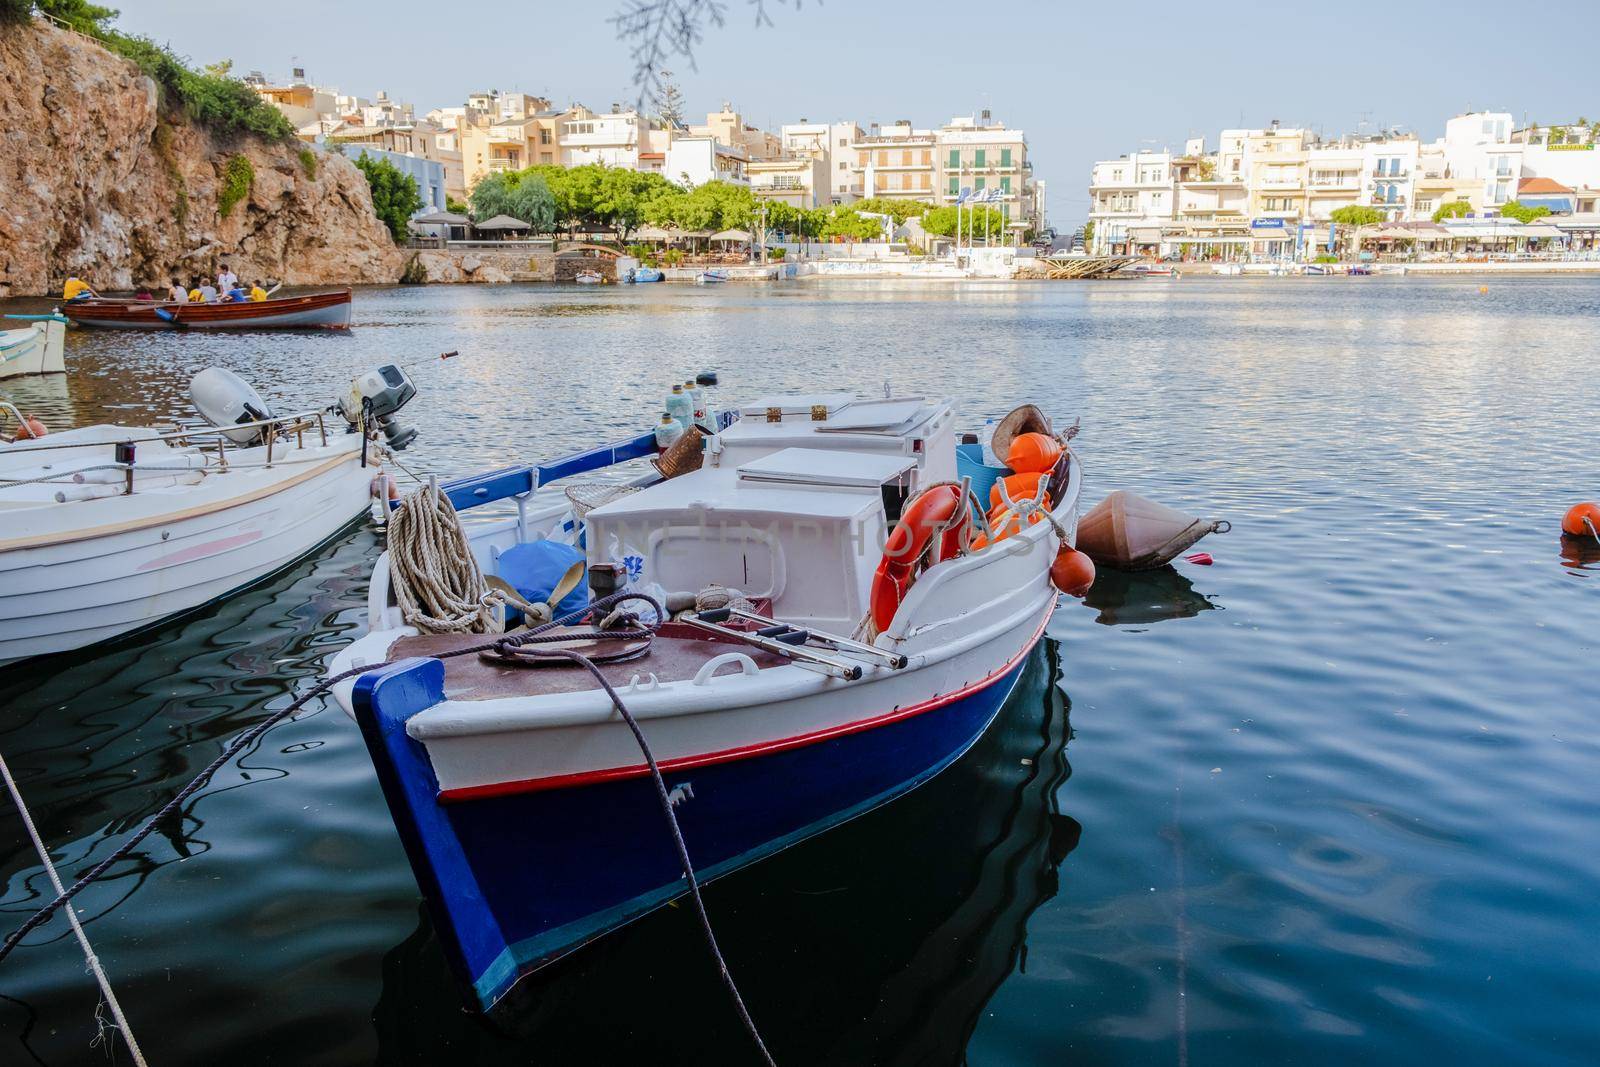 Agios Nikolaos, Crete, Greece. Agios Nikolaos is a picturesque town in the eastern part of the island Crete built on the northwest side of the peaceful bay of Mirabello Crete Greece